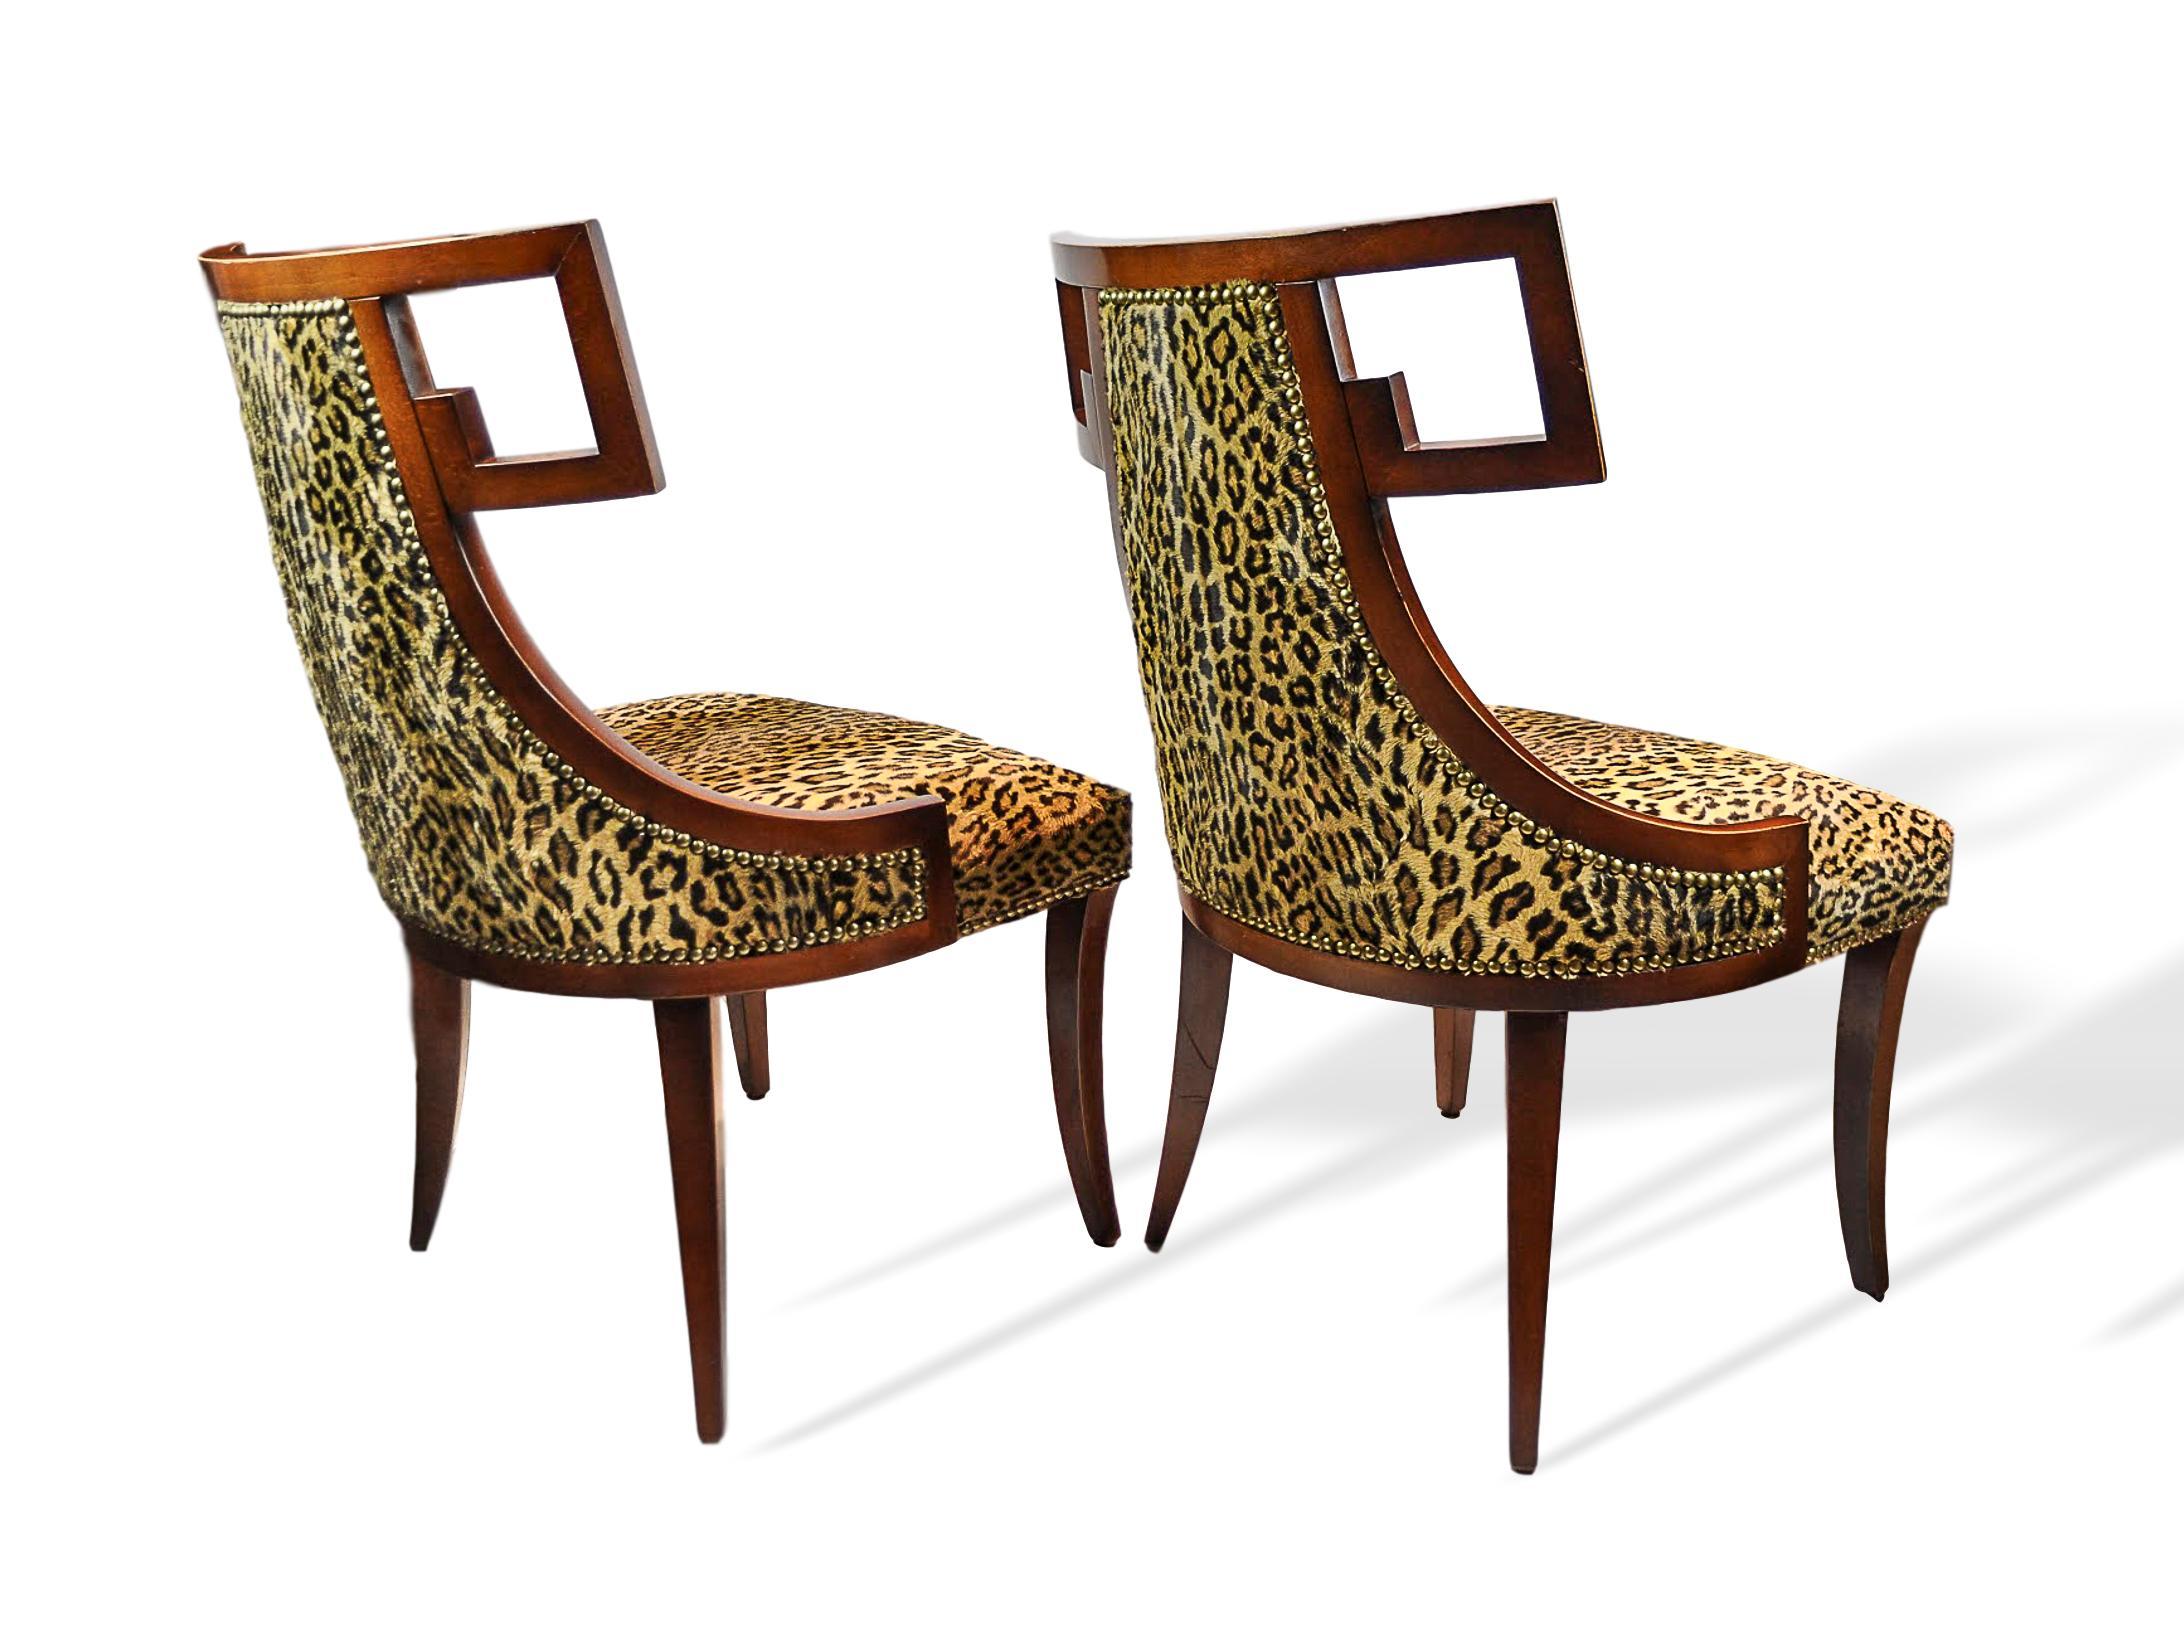 Pair of Baker Greek Key Chairs Newly Upholstered in Ralph Lauren Leopard Fabric In Good Condition For Sale In Banner Elk, NC